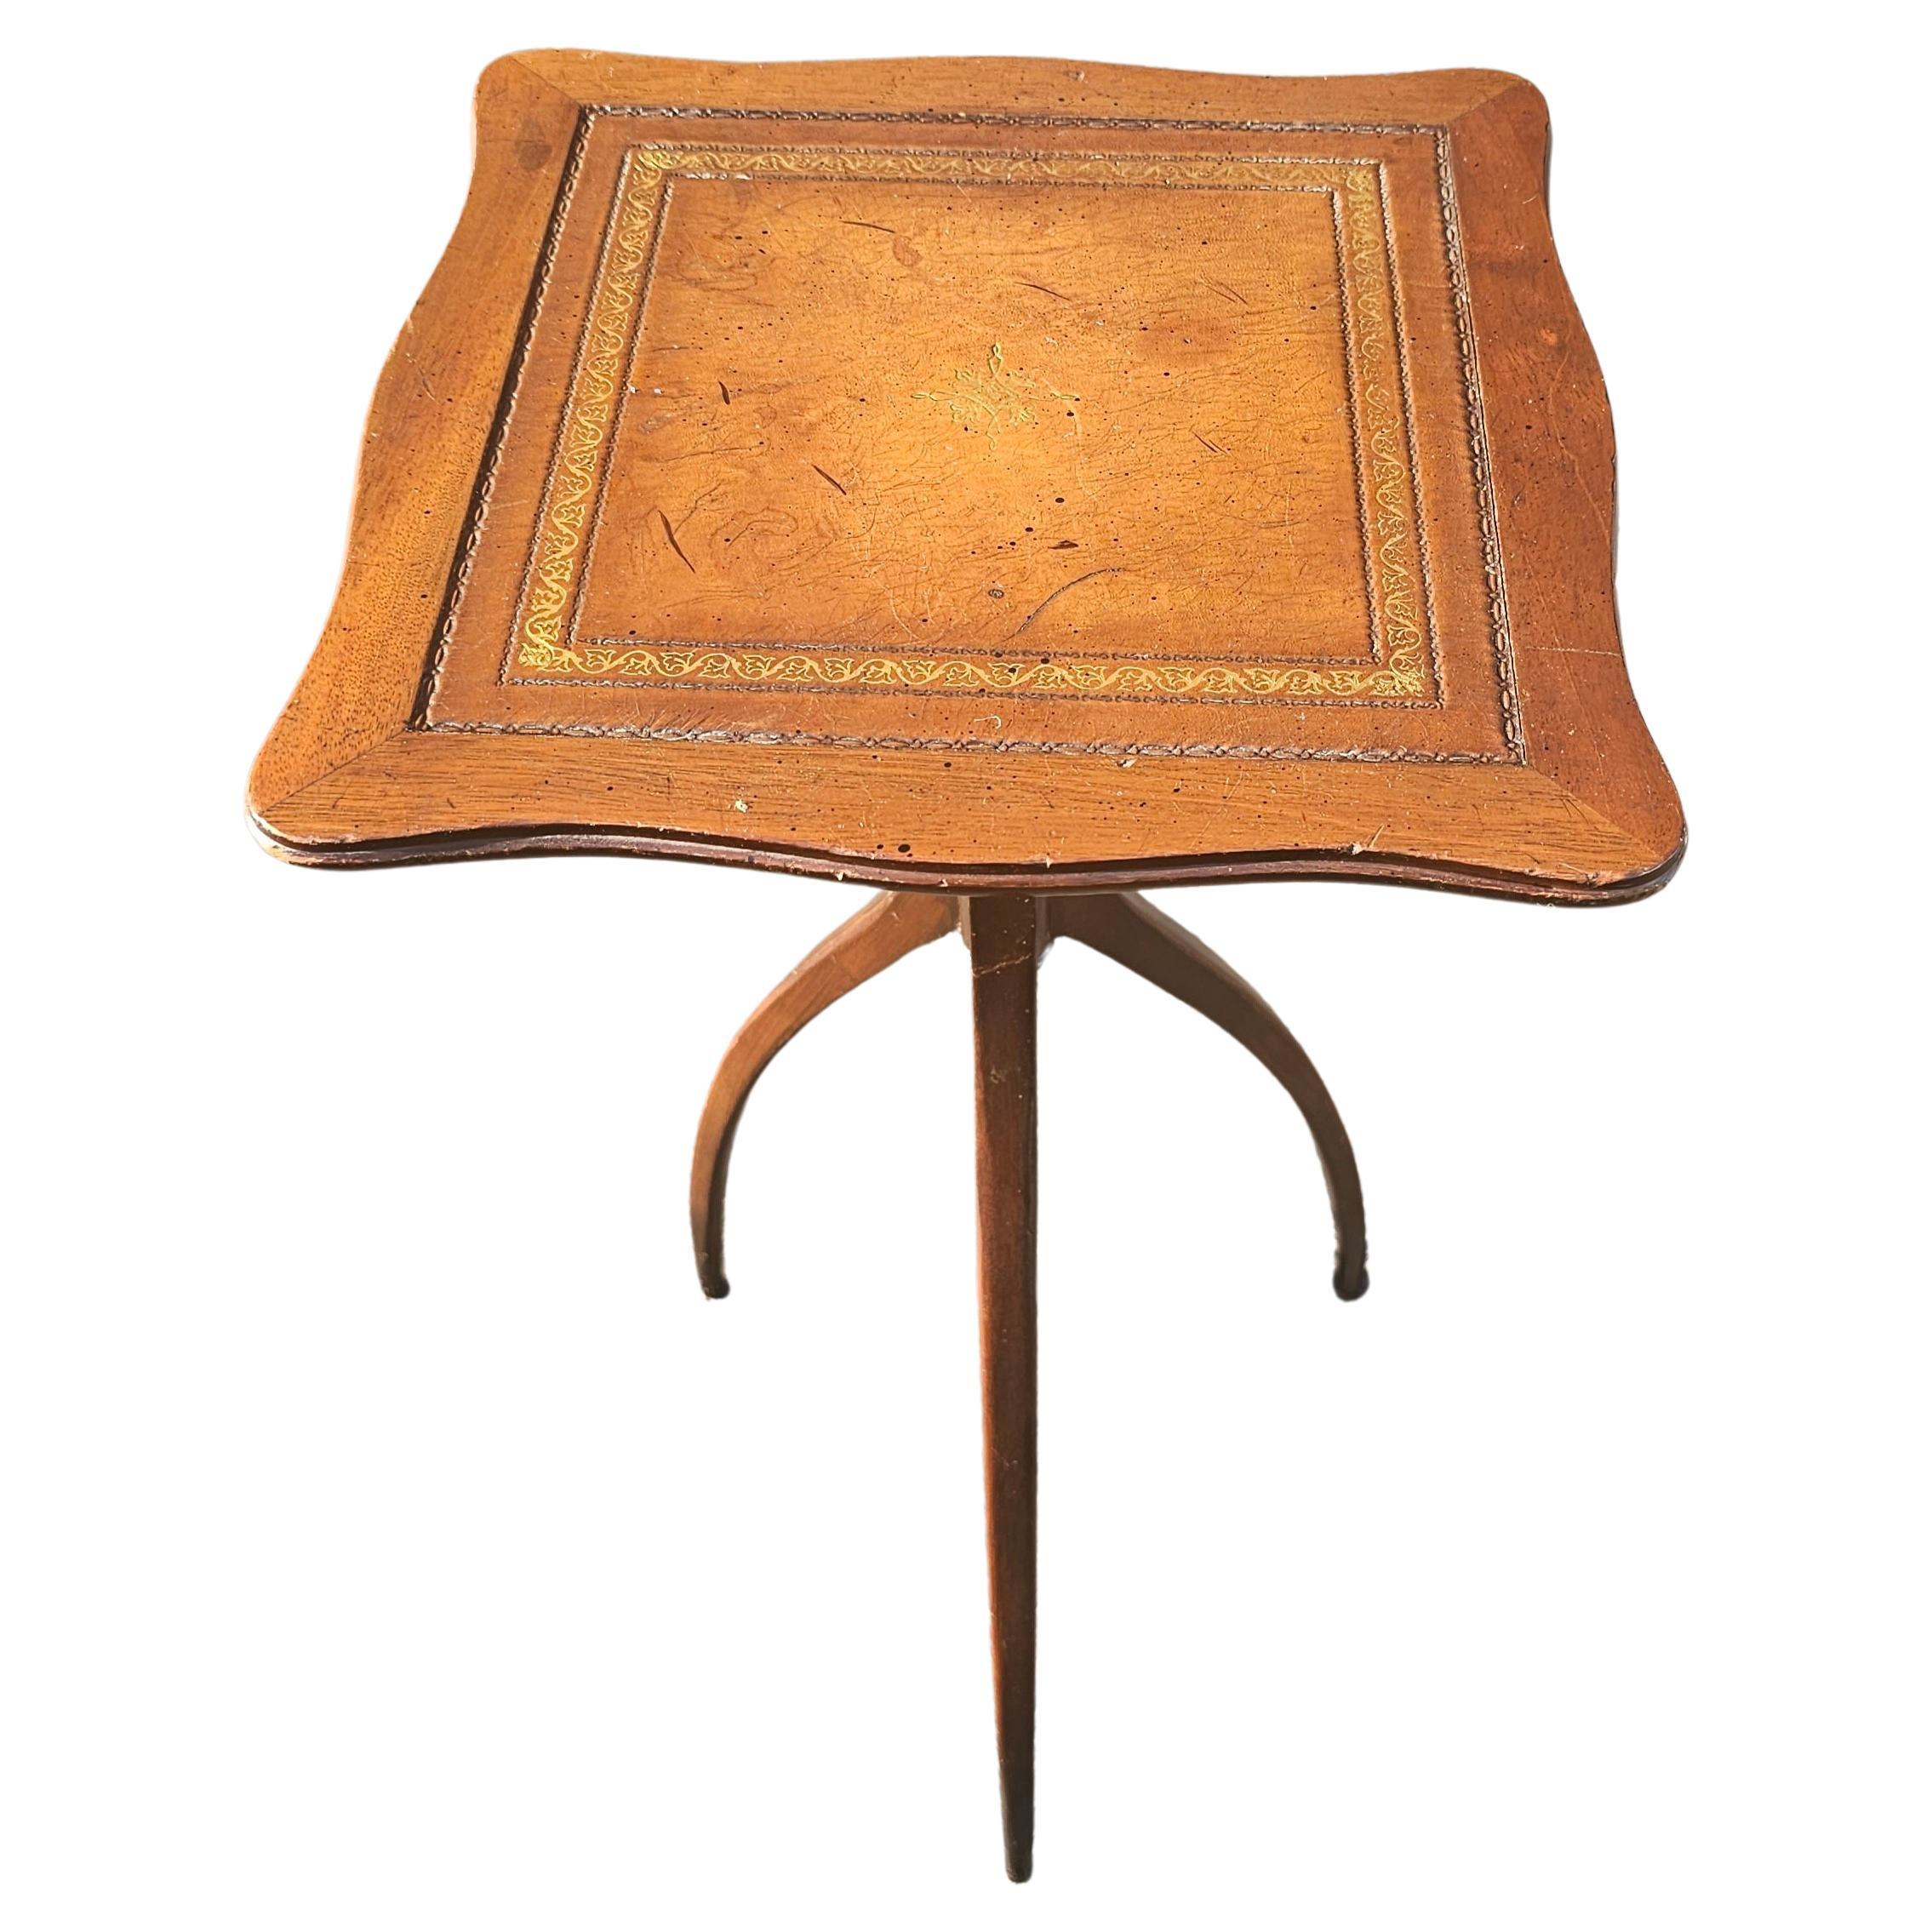 Mid 20th Century Spider Tripod Mahogany and Tooled Leather Top Candle Stand.
Measures 11